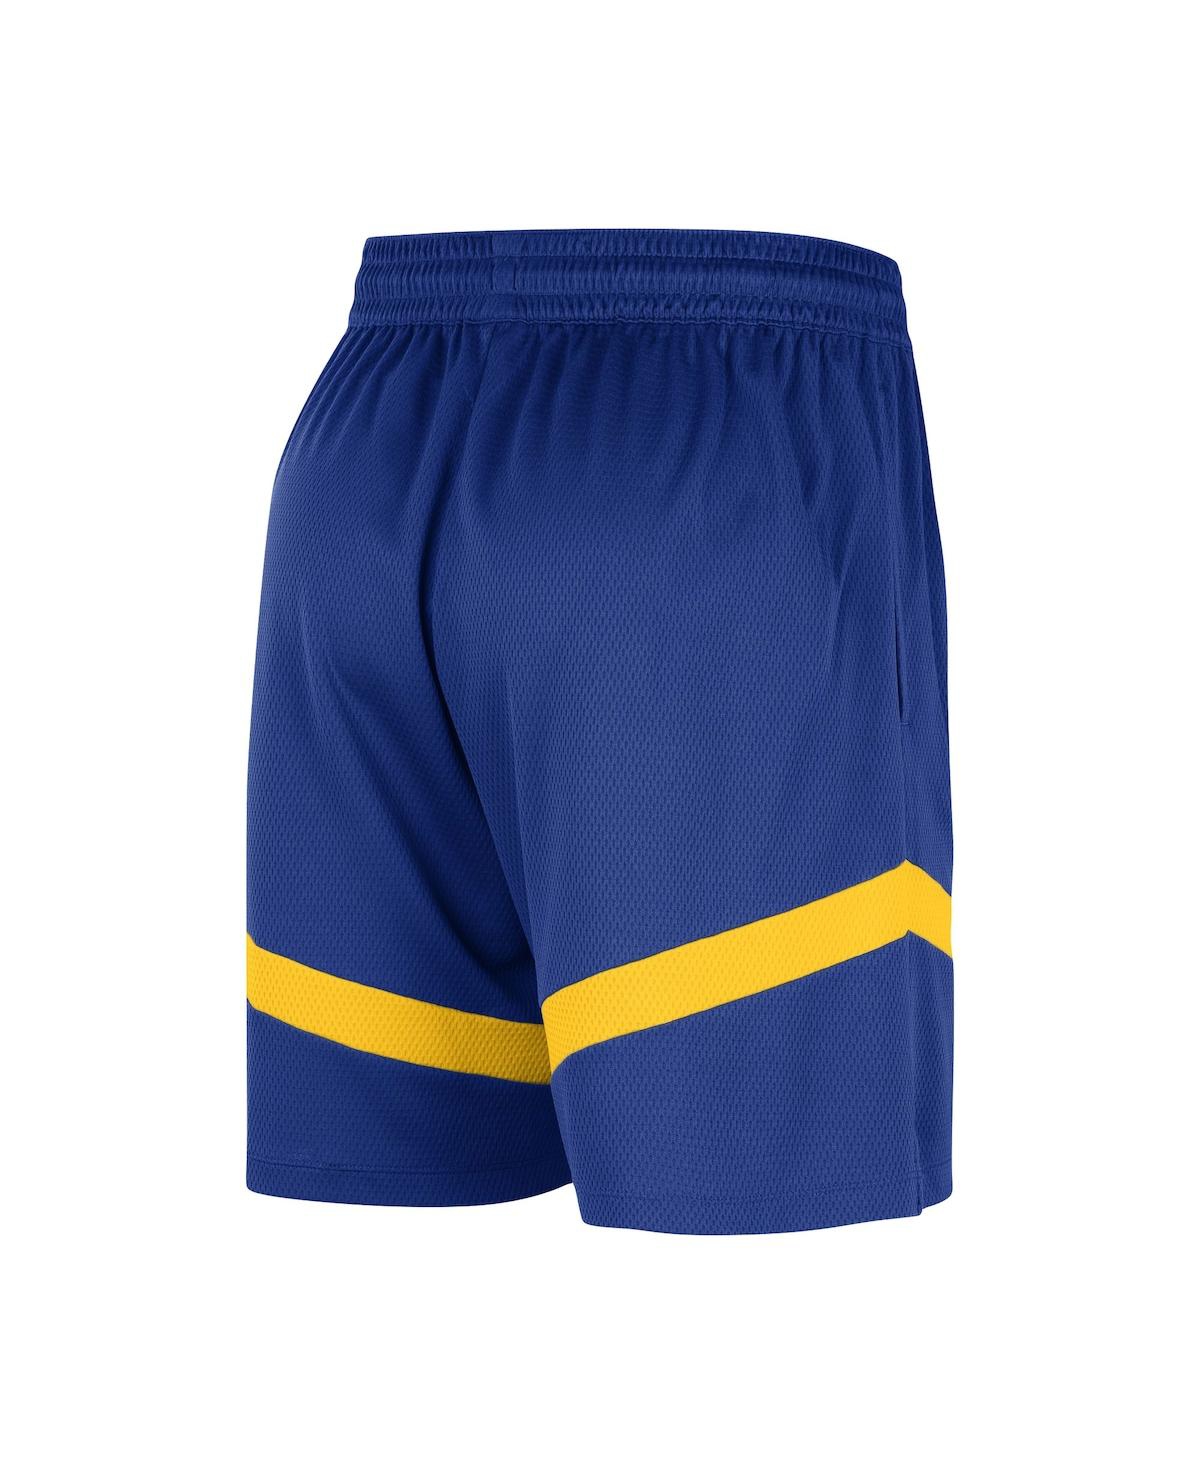 Shop Nike Men's  Royal Golden State Warriors On-court Practice Warmup Performance Shorts